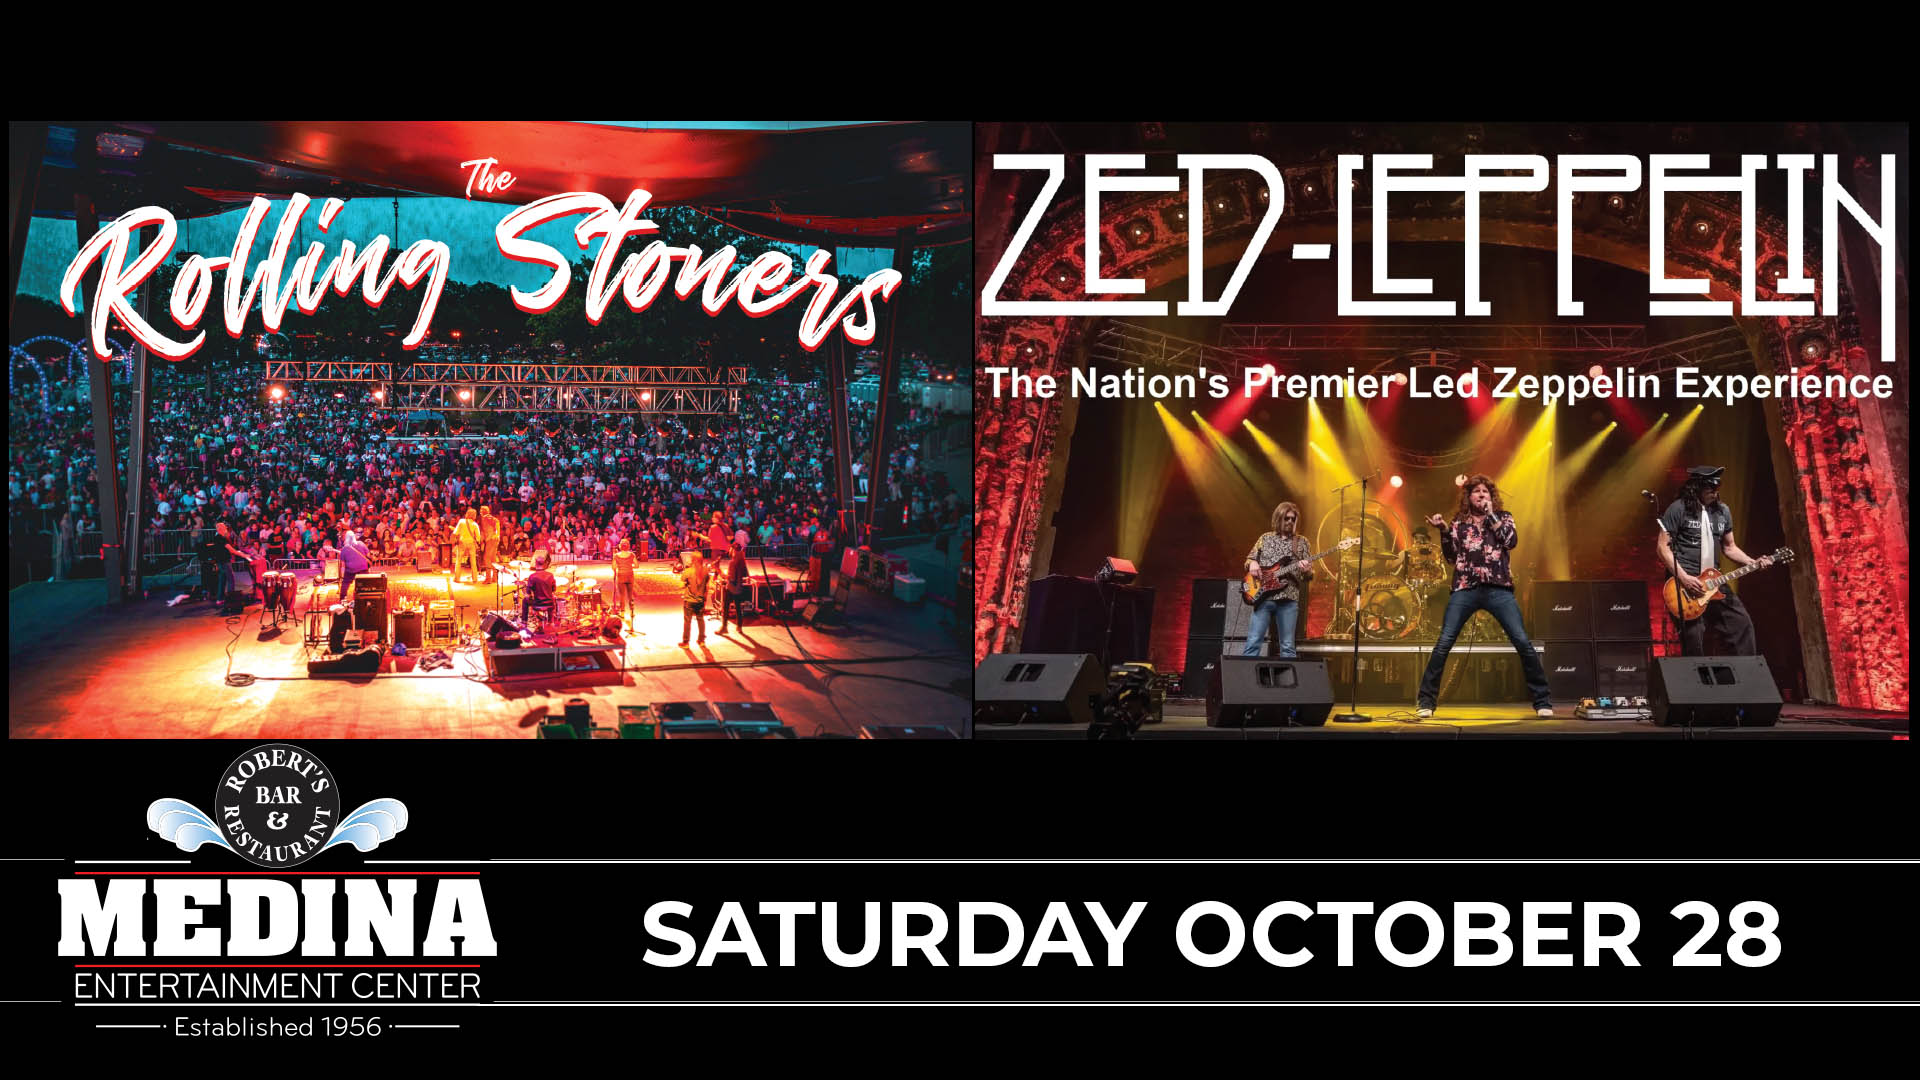 The Rolling Stoners + Zed Leppelin Medina Entertainment Center Saturday, October 28, 2023 Doors: 7:00PM | Music: 8:00PM | 21+ Ticket Prices: $27.00 (Gold Seating), $22.00 (Silver Seating) & $17.00 (GA Seating) plus applicable fees